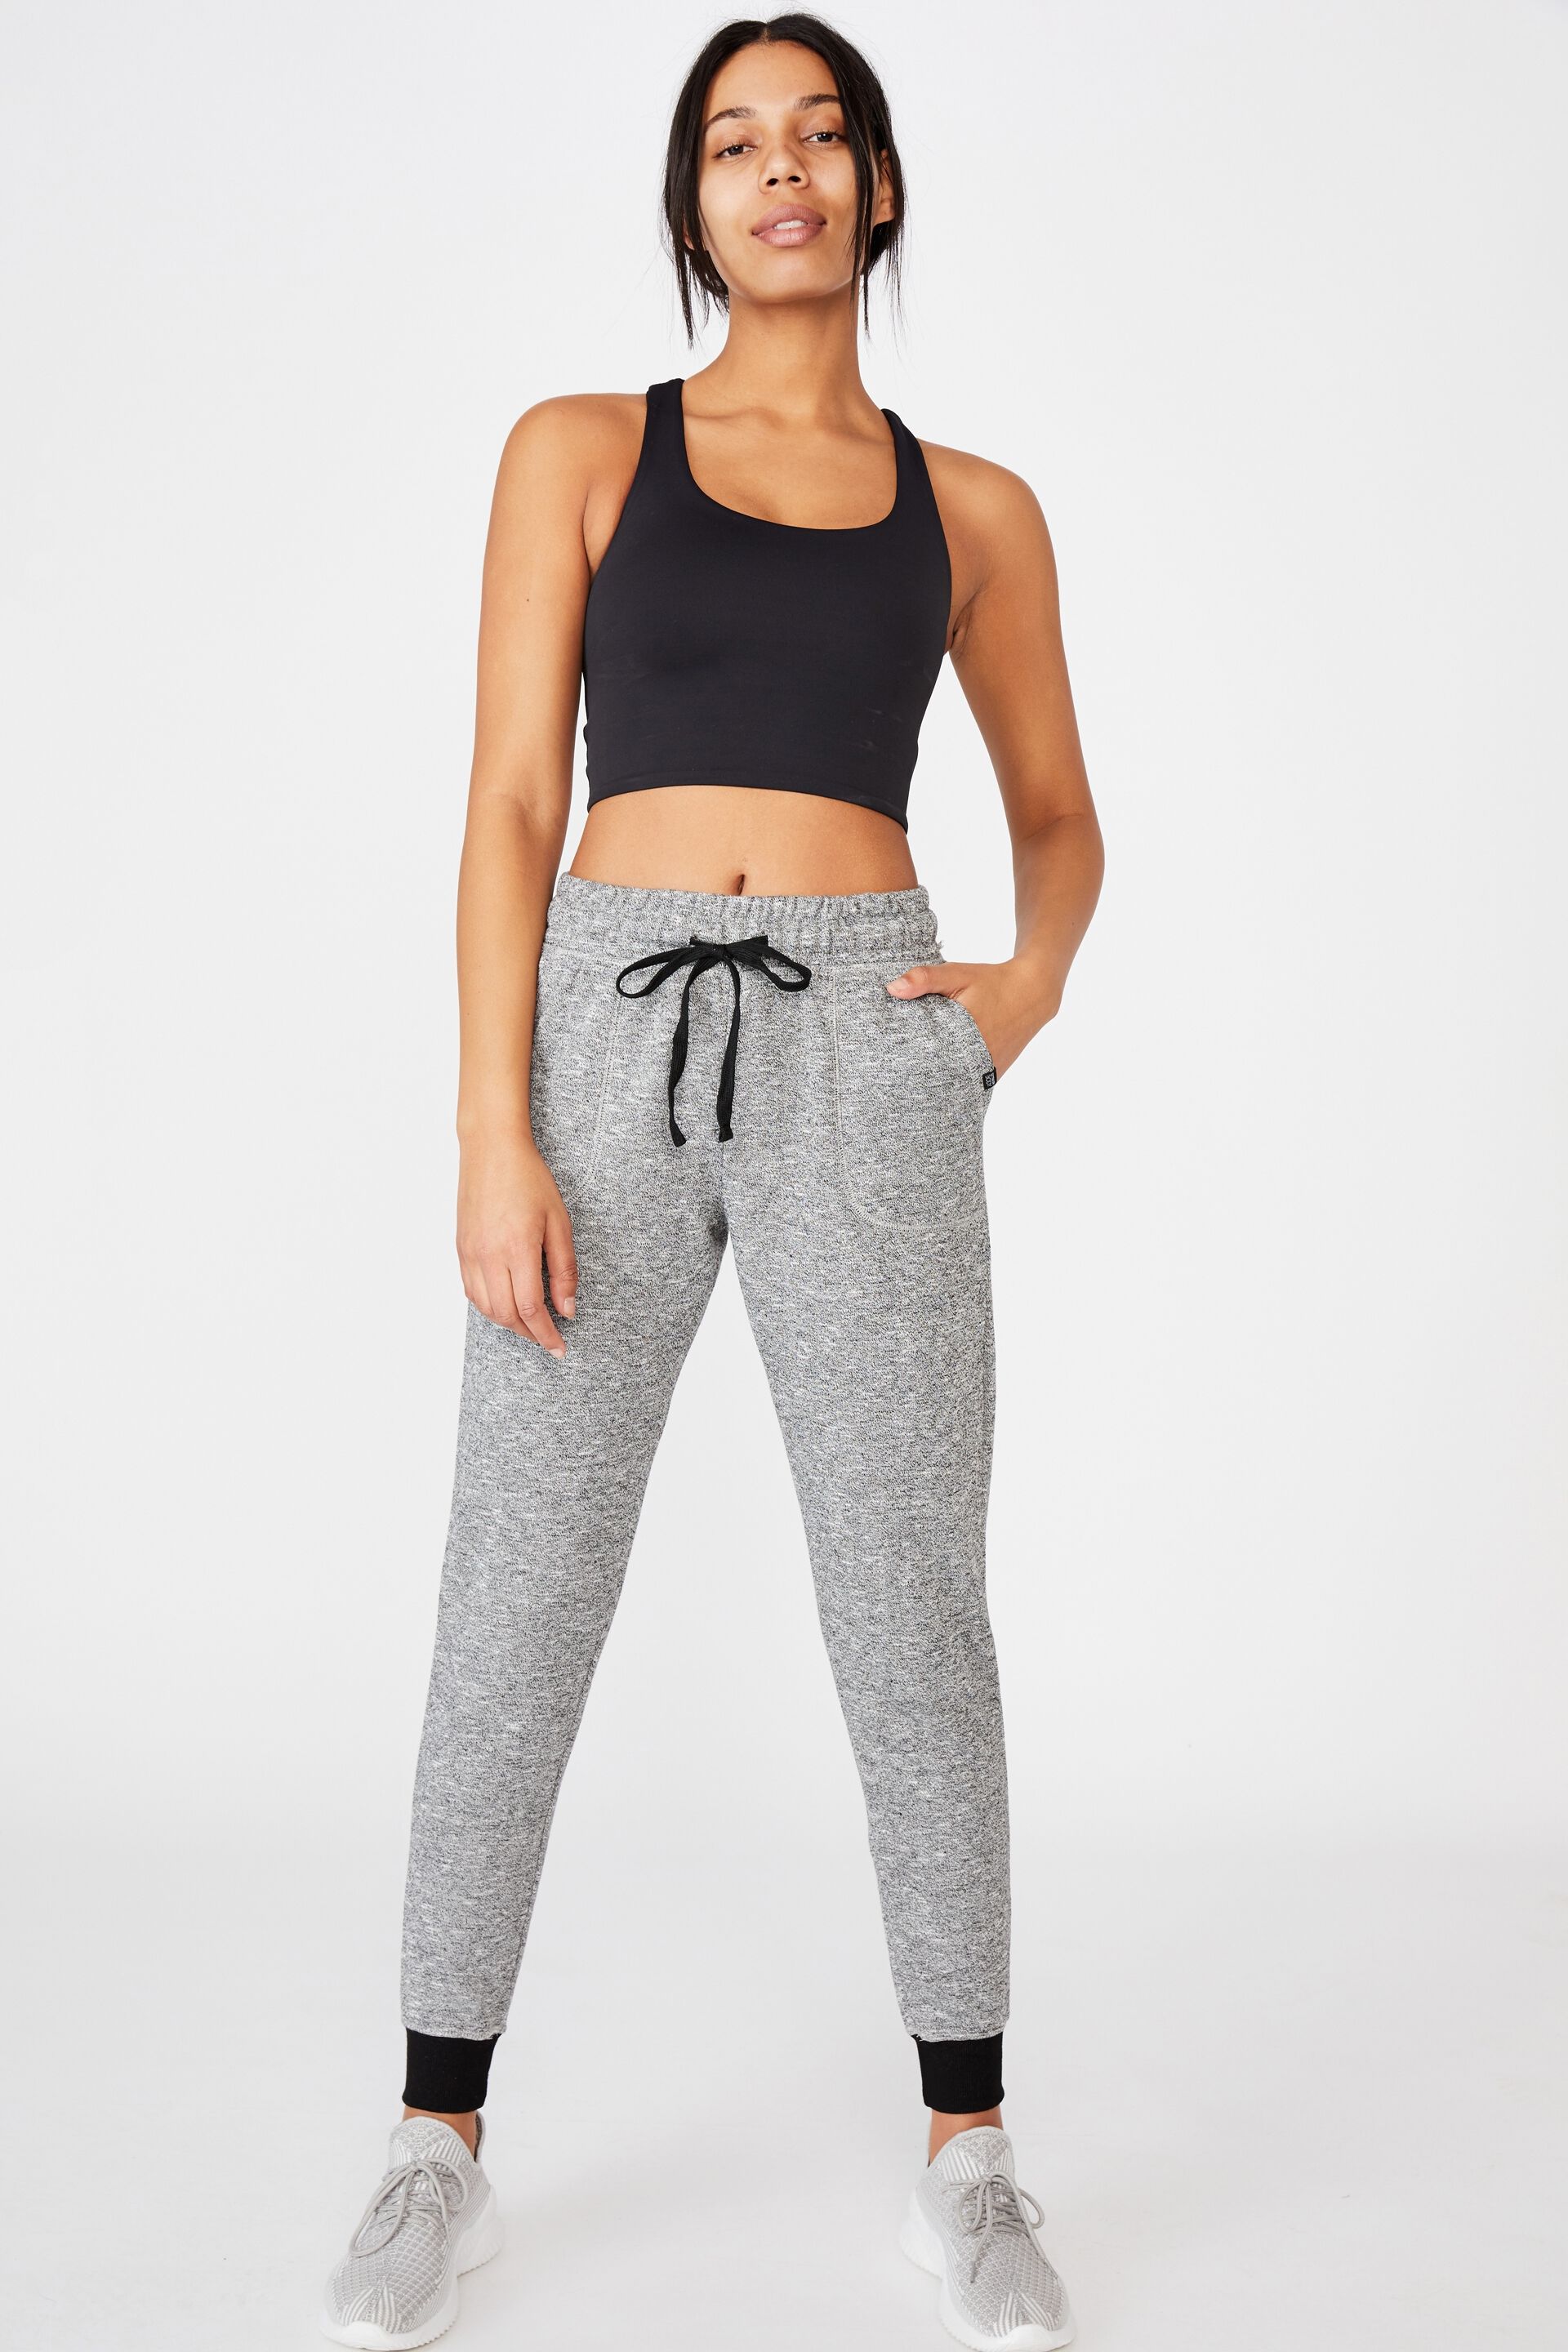 fitted track pants womens